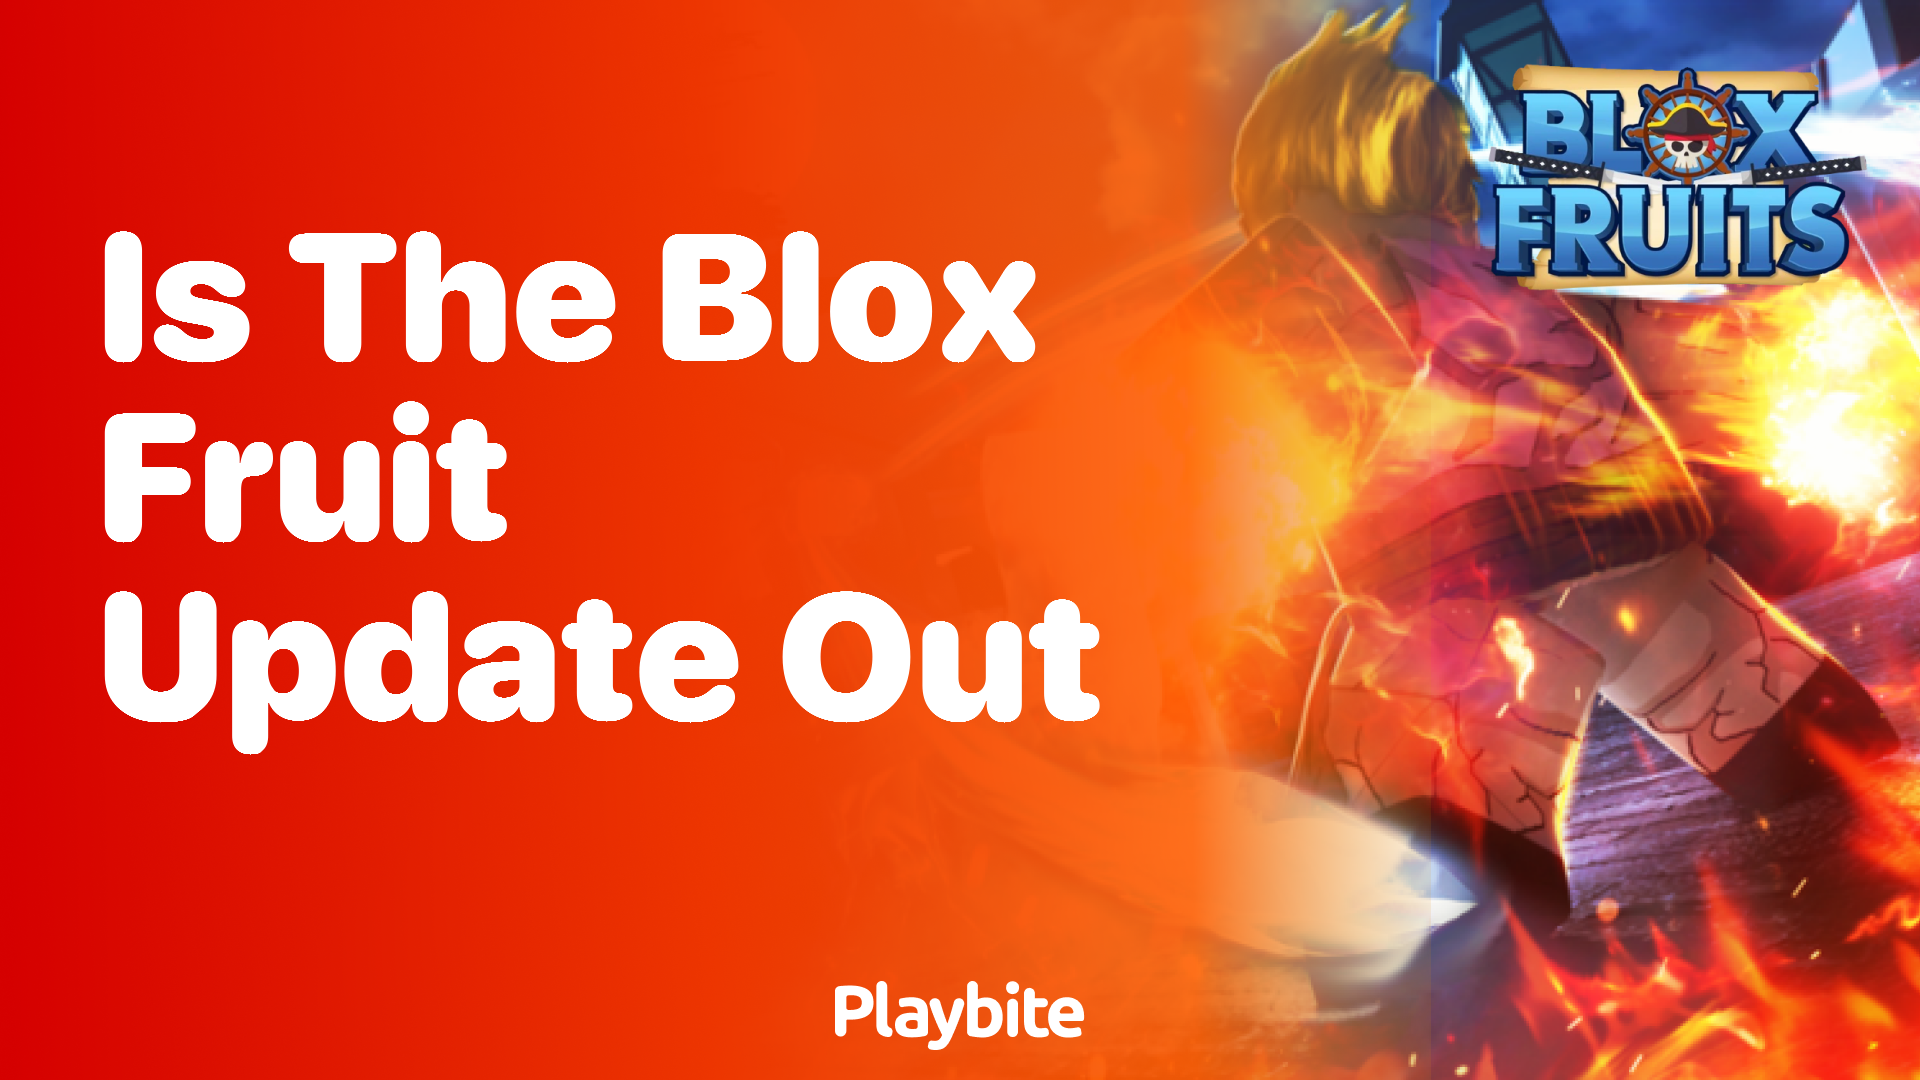 Is the Blox Fruit Update Out? Discover the Latest on This Roblox Adventure